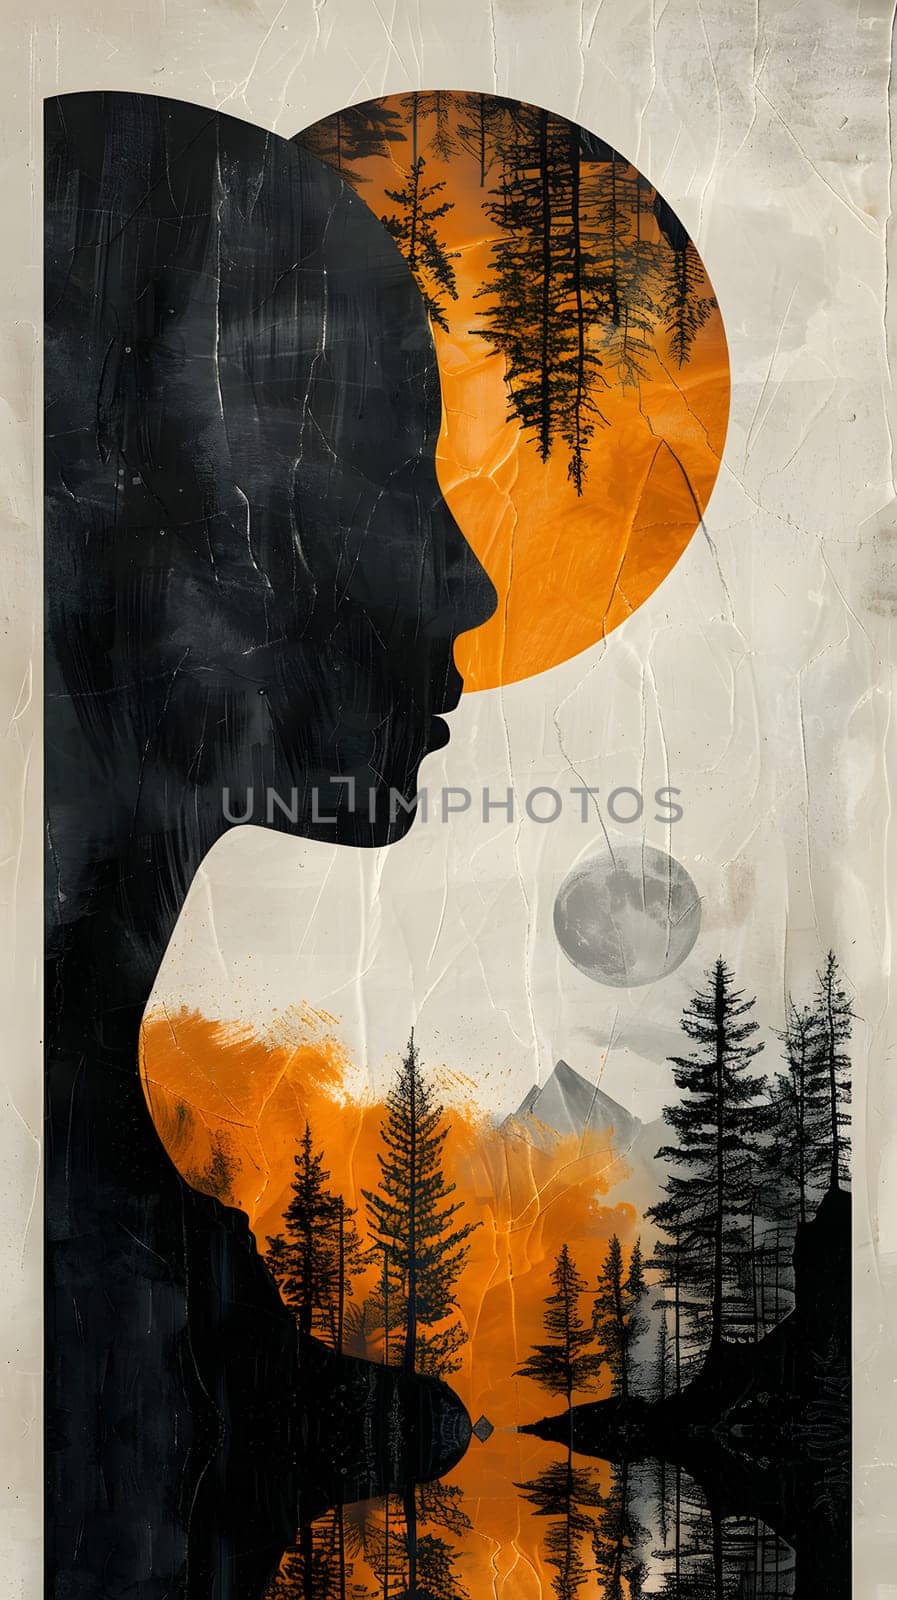 An exquisite painting depicting a womans face surrounded by trees and mountains. The artist used a stunning combination of colors and shapes to create a captivating landscape illustration